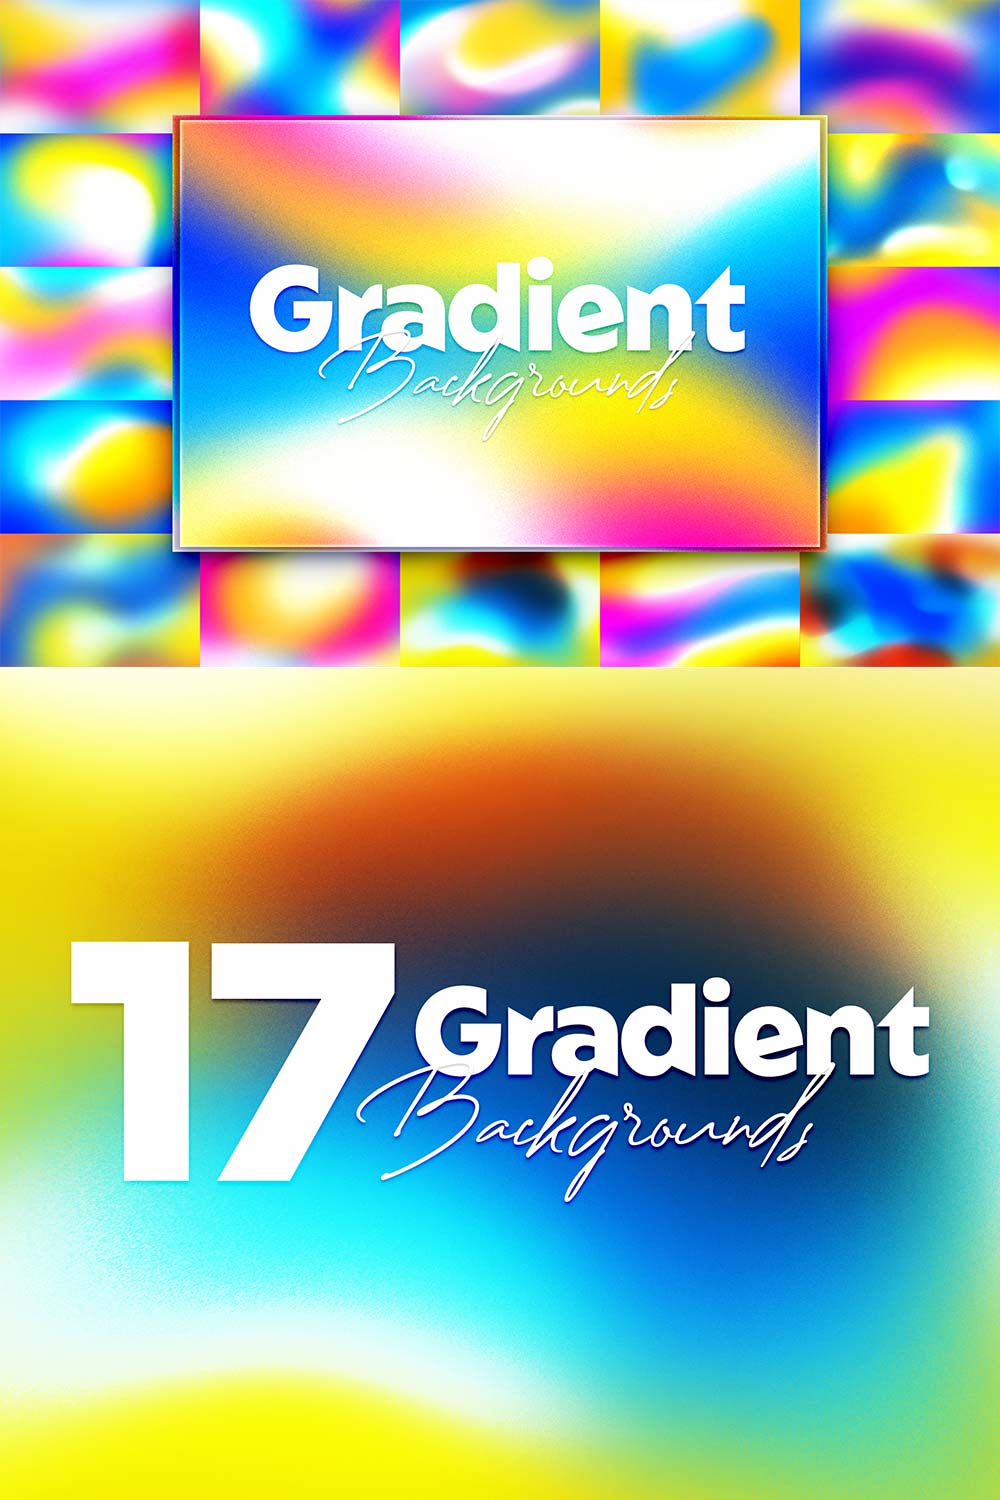 Gradient Backgrounds pinterest preview image.